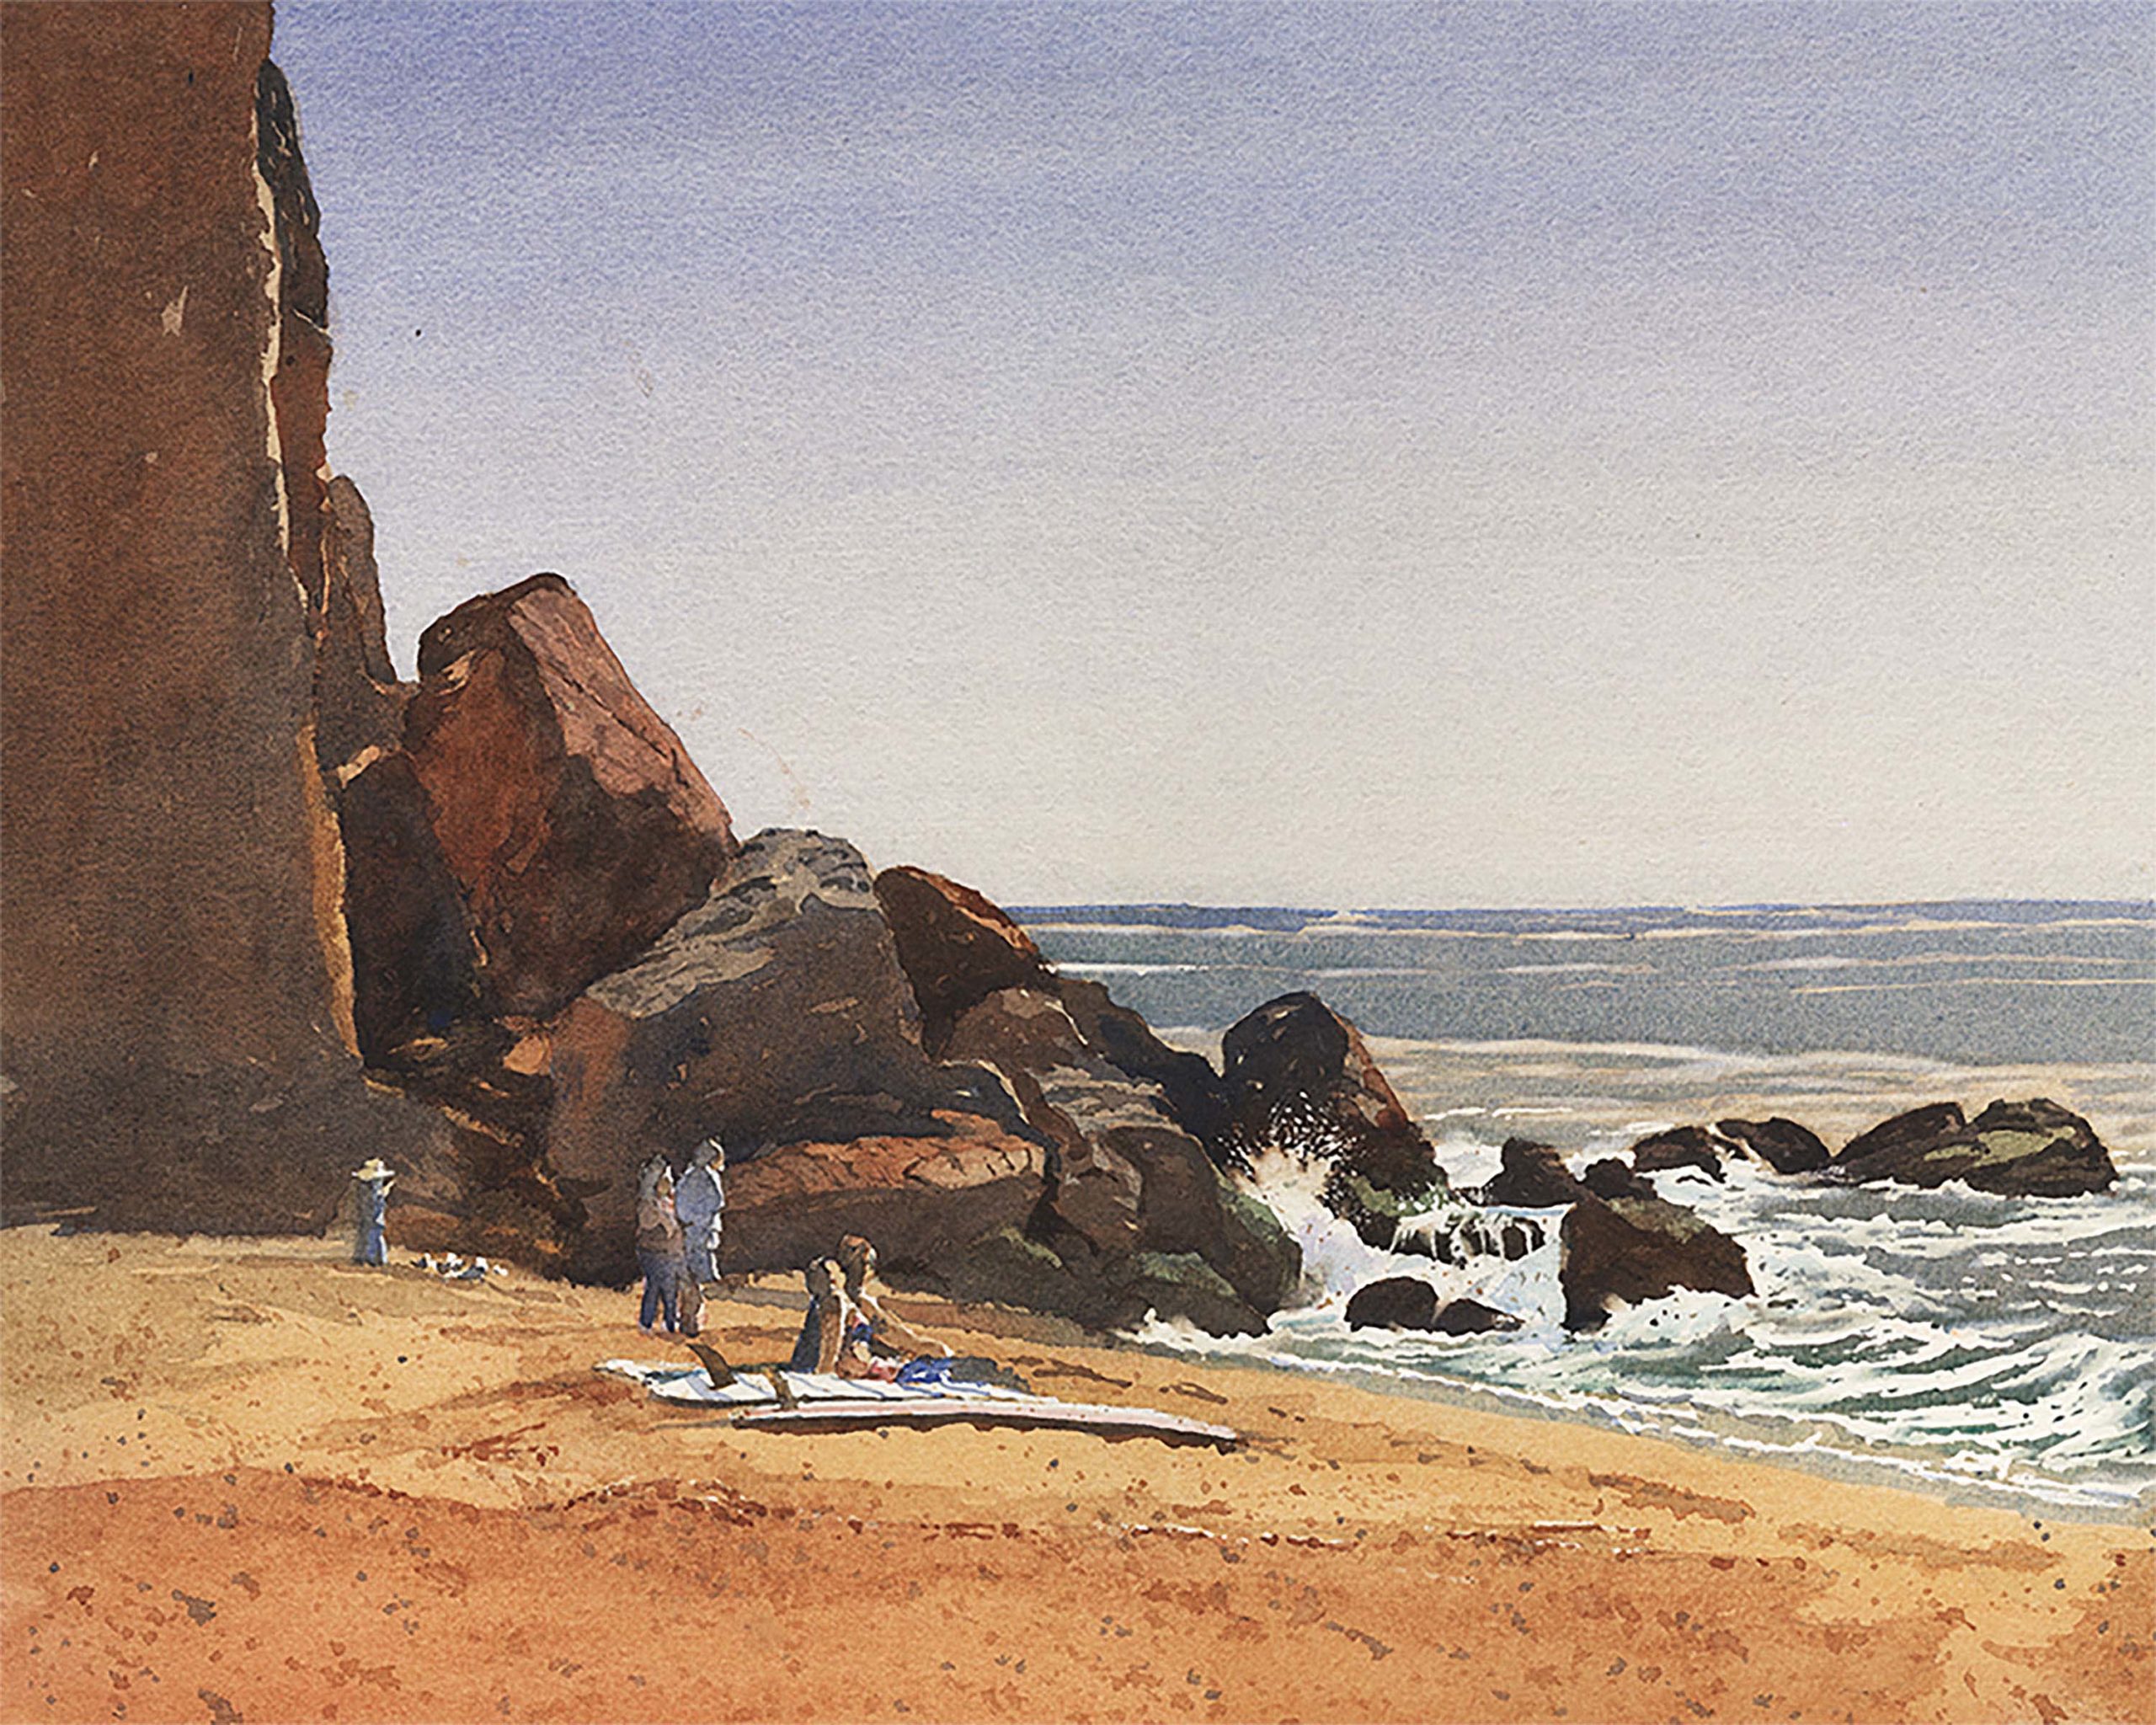 Watercolor painting of people on a beach in Malibu, California